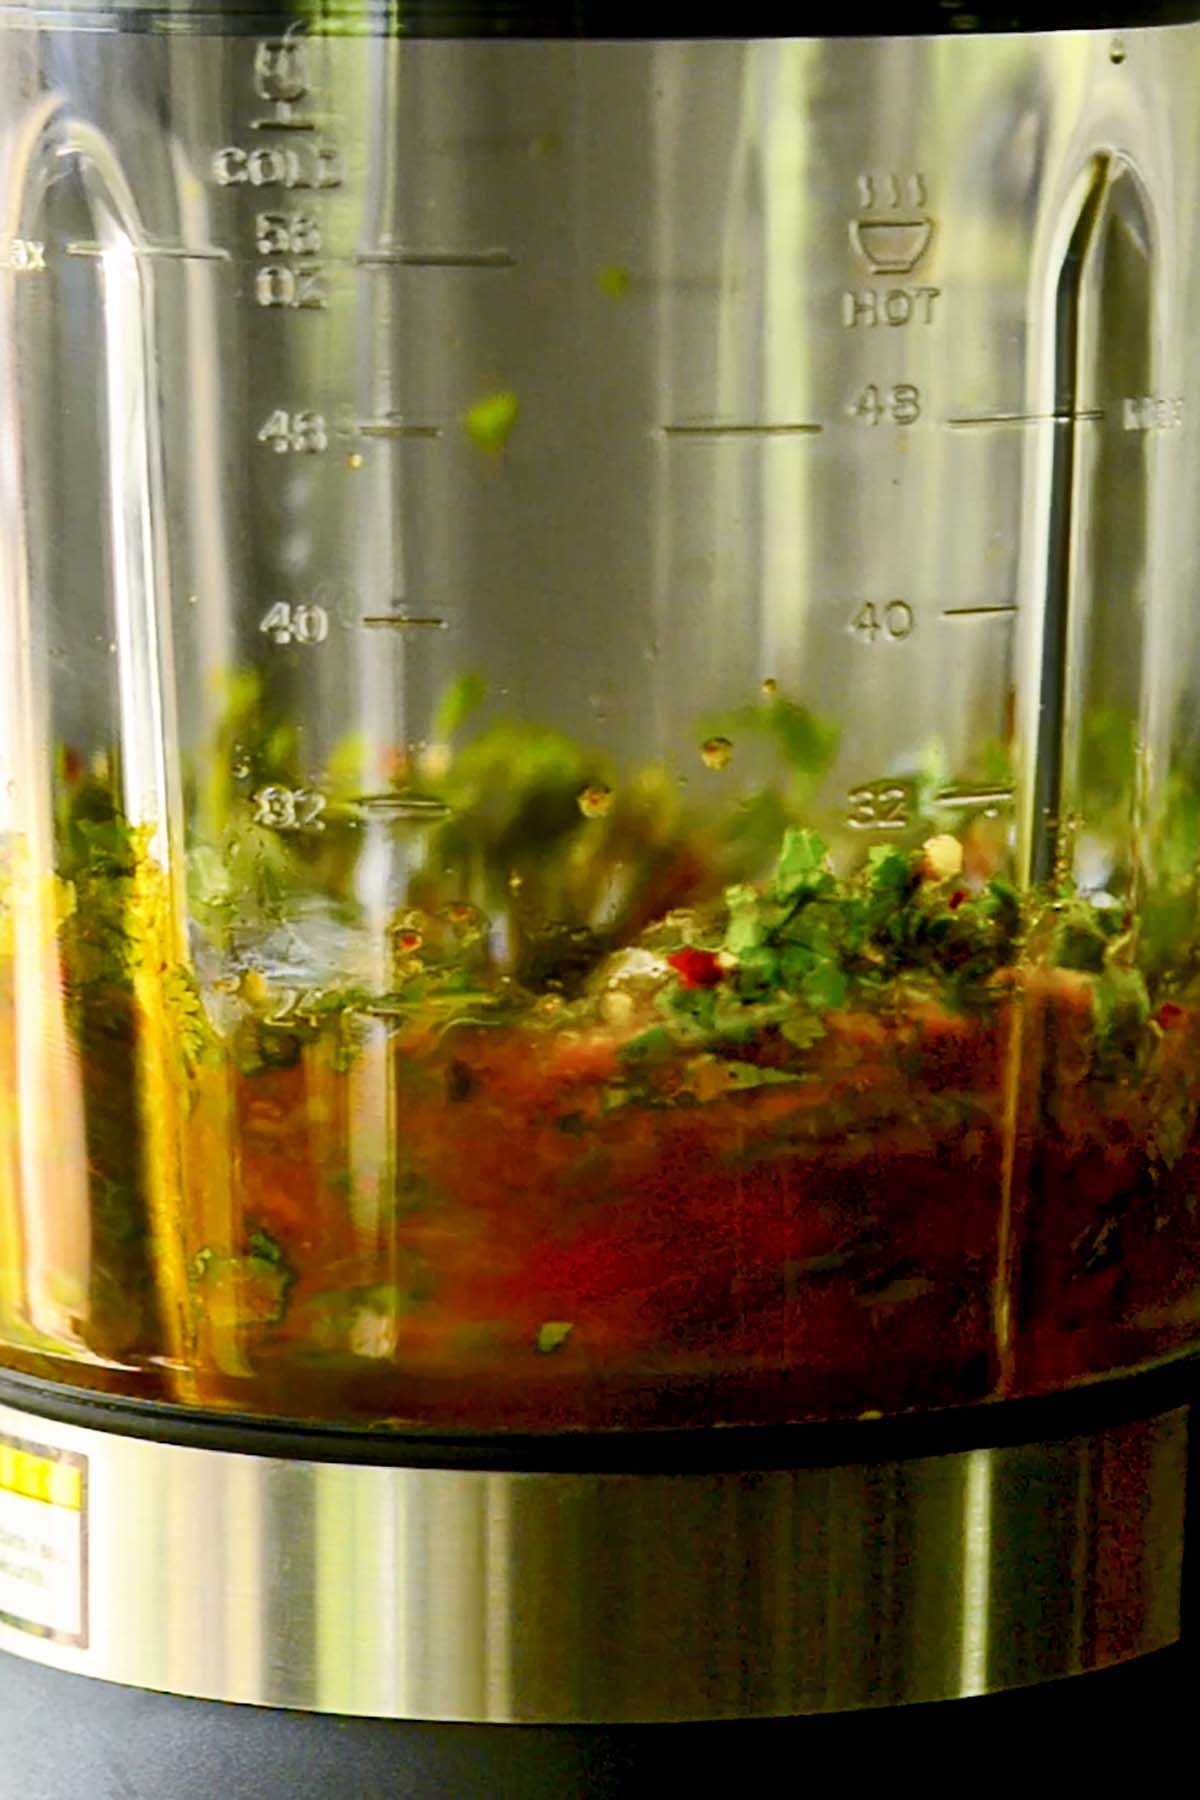 Red chimichurri sauce being gently blended in a blender.